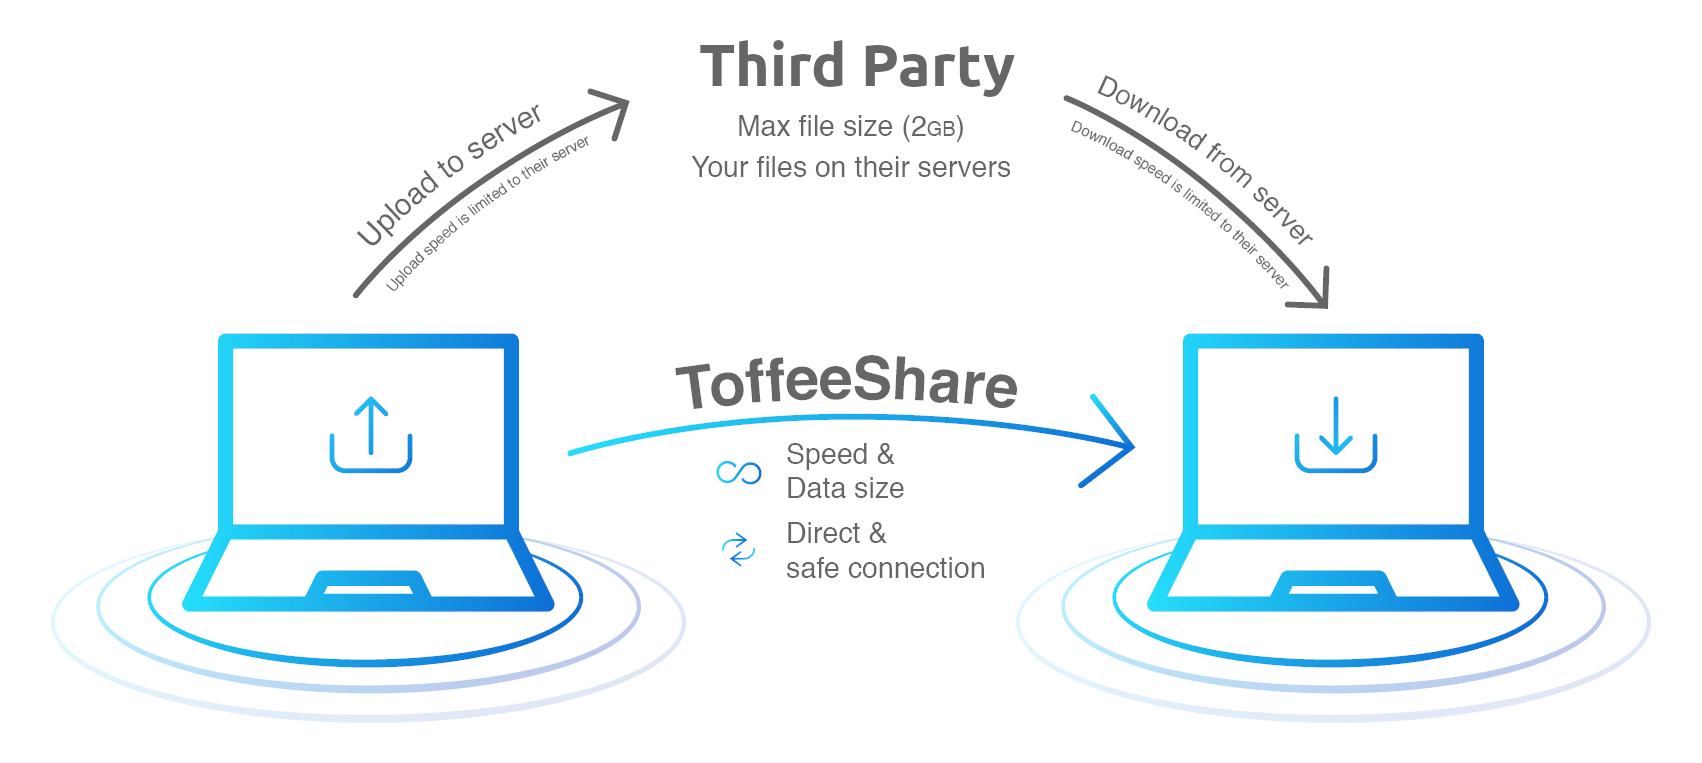 Demonstration of how ToffeeShare enables a direct file transfer from sender to receiver